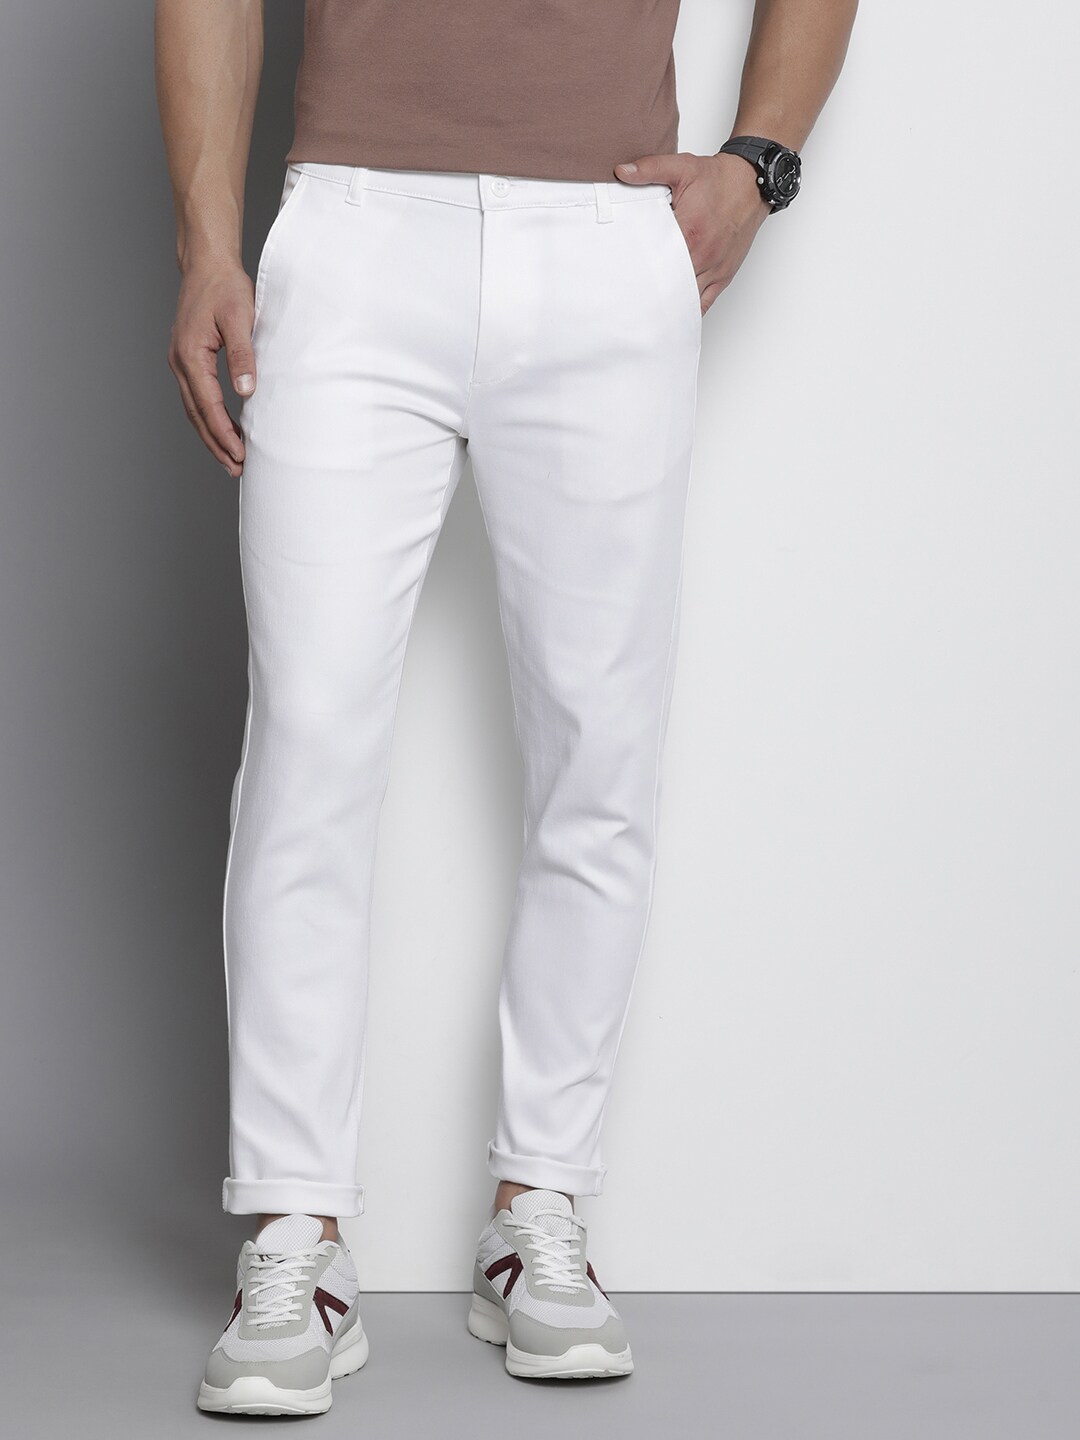 The Indian Garage Co Men Slim Fit Chinos